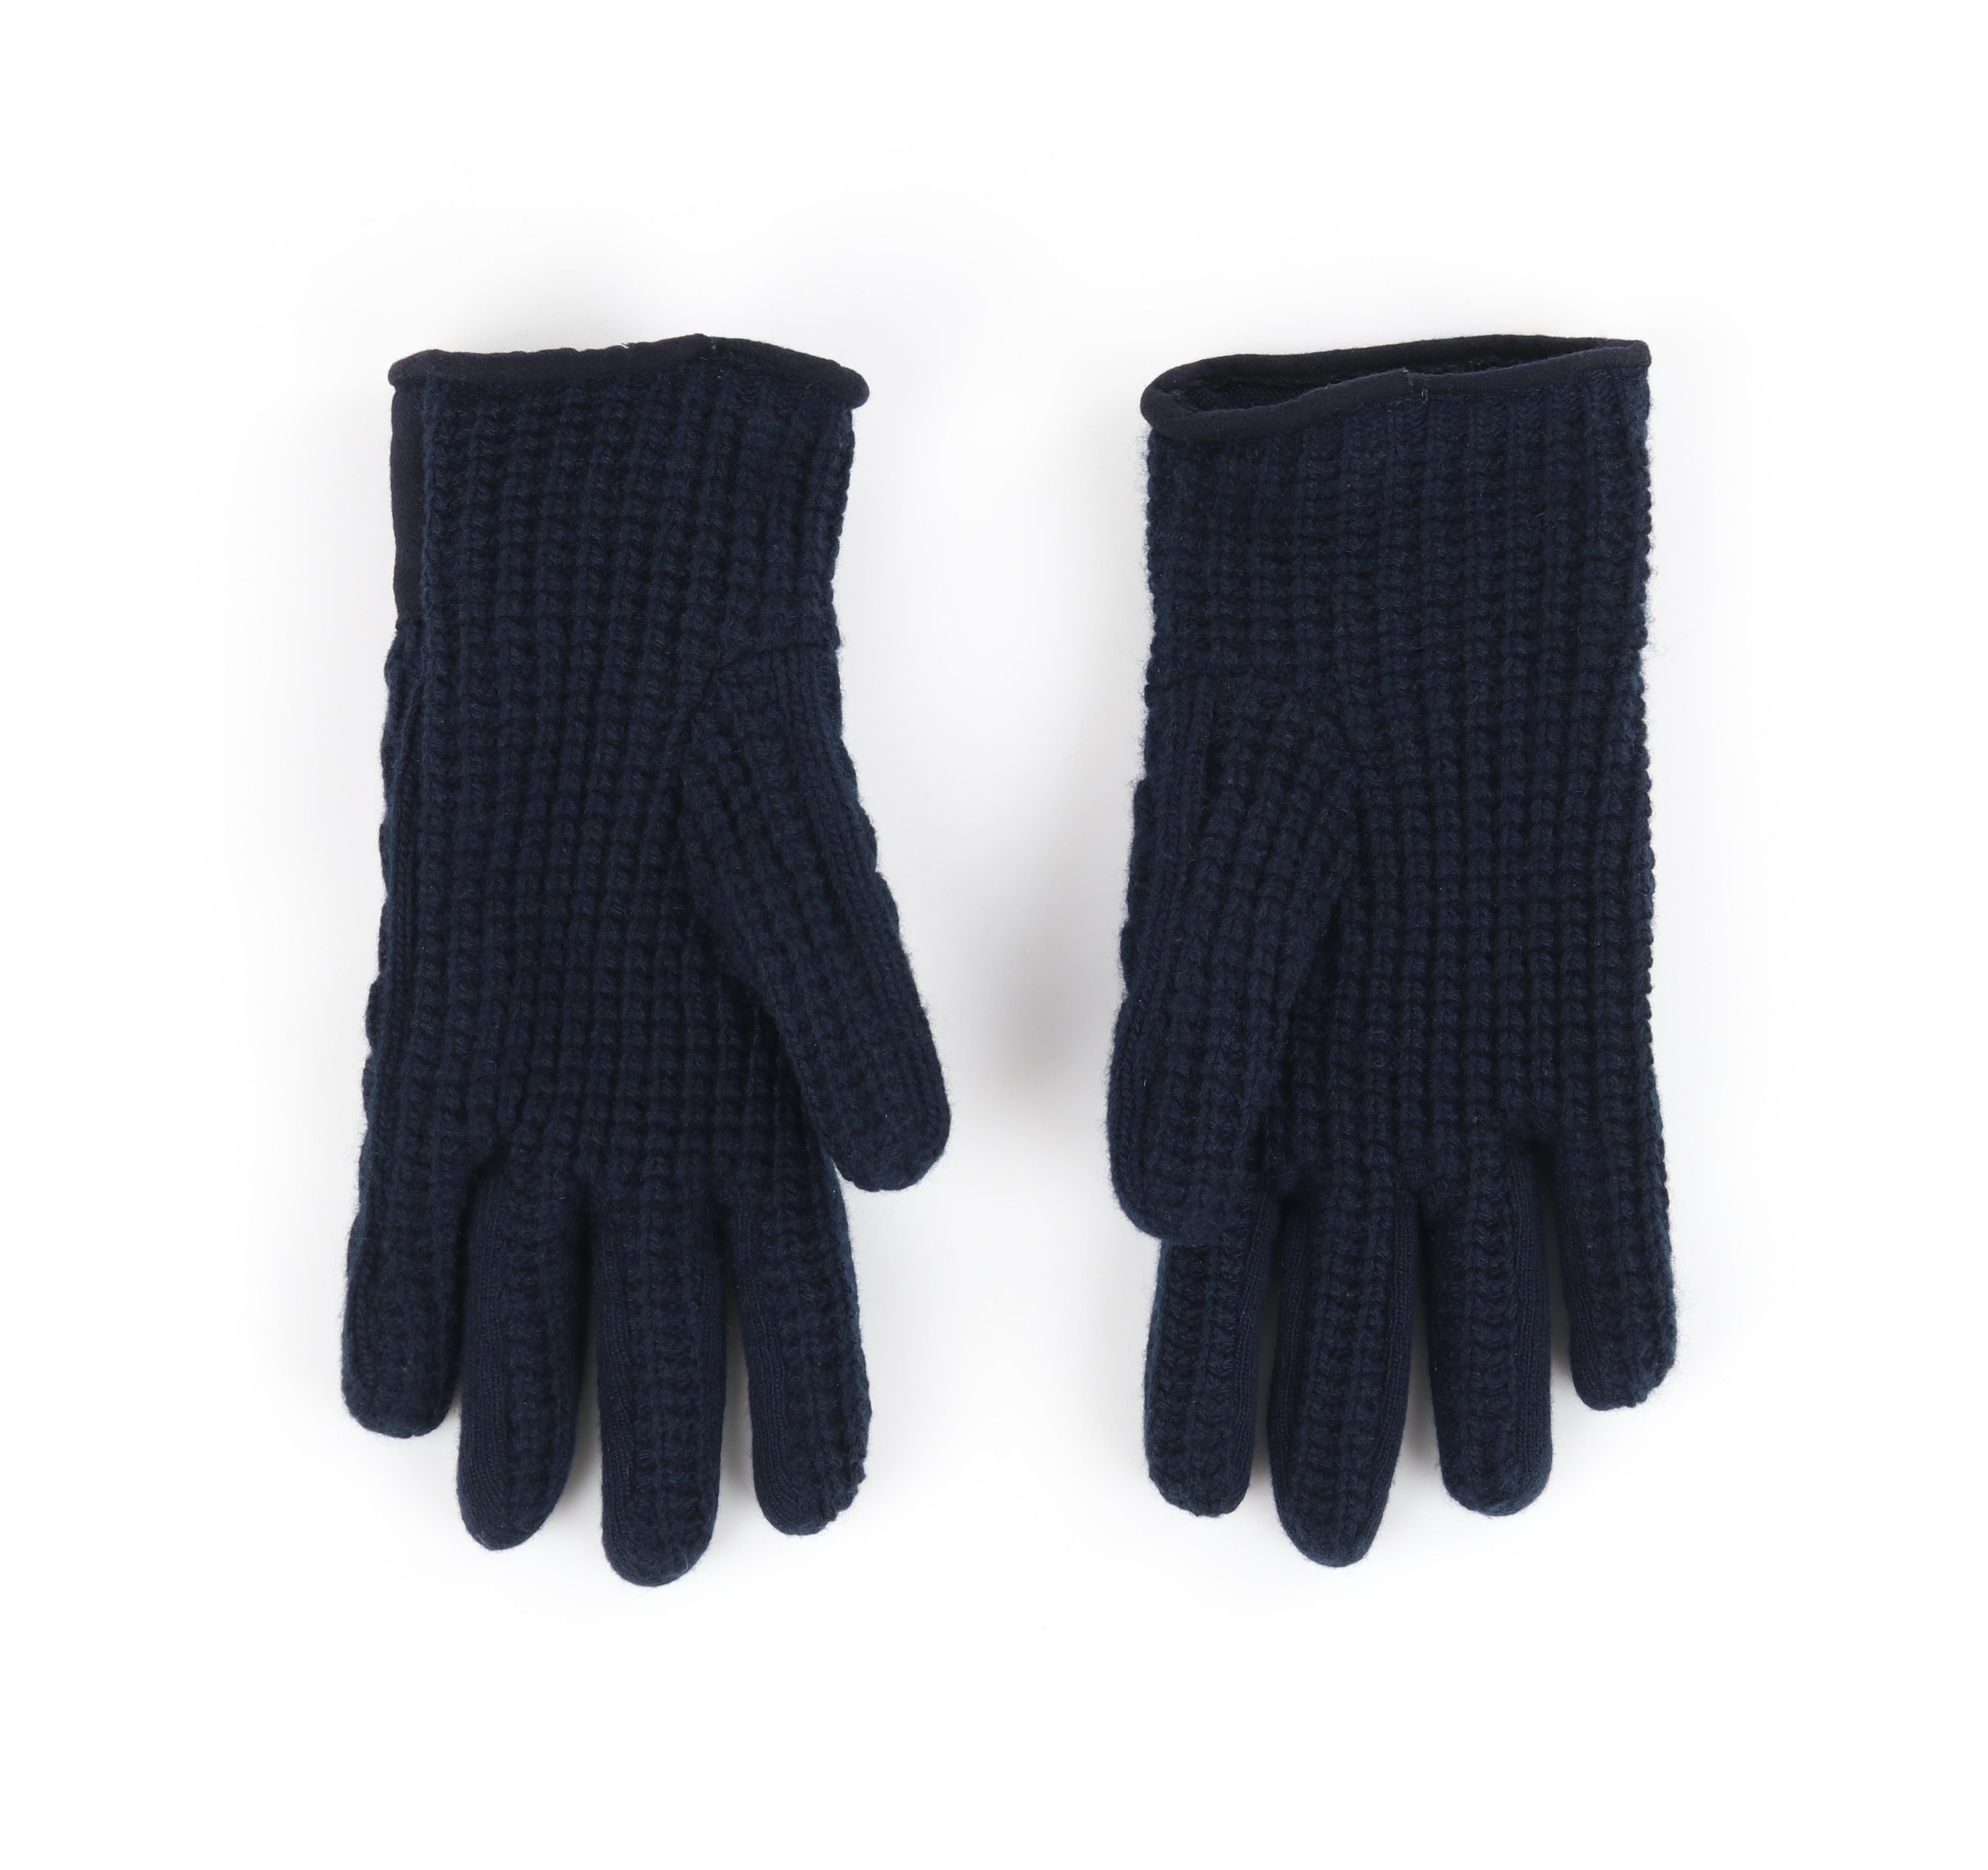 knit glove with patch